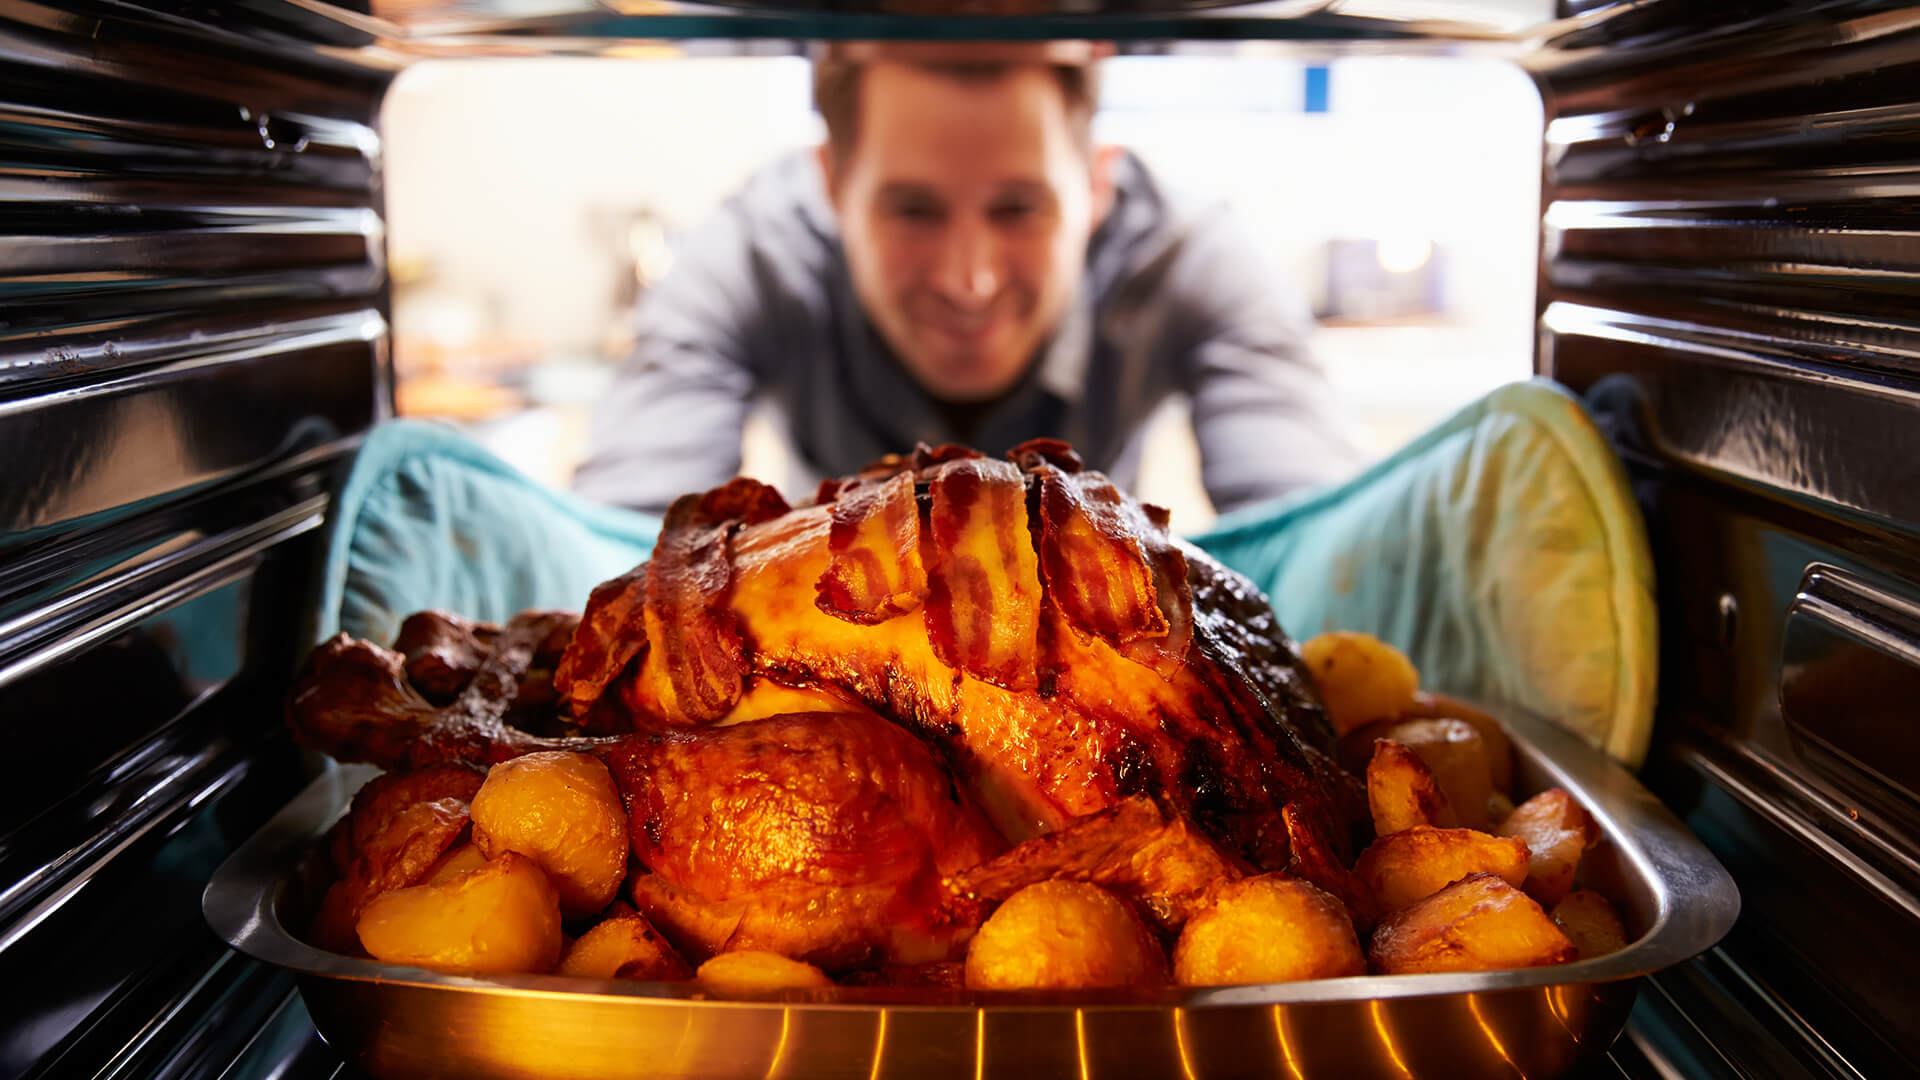 Making These Thanksgiving Mistakes Will Cost You Too Much